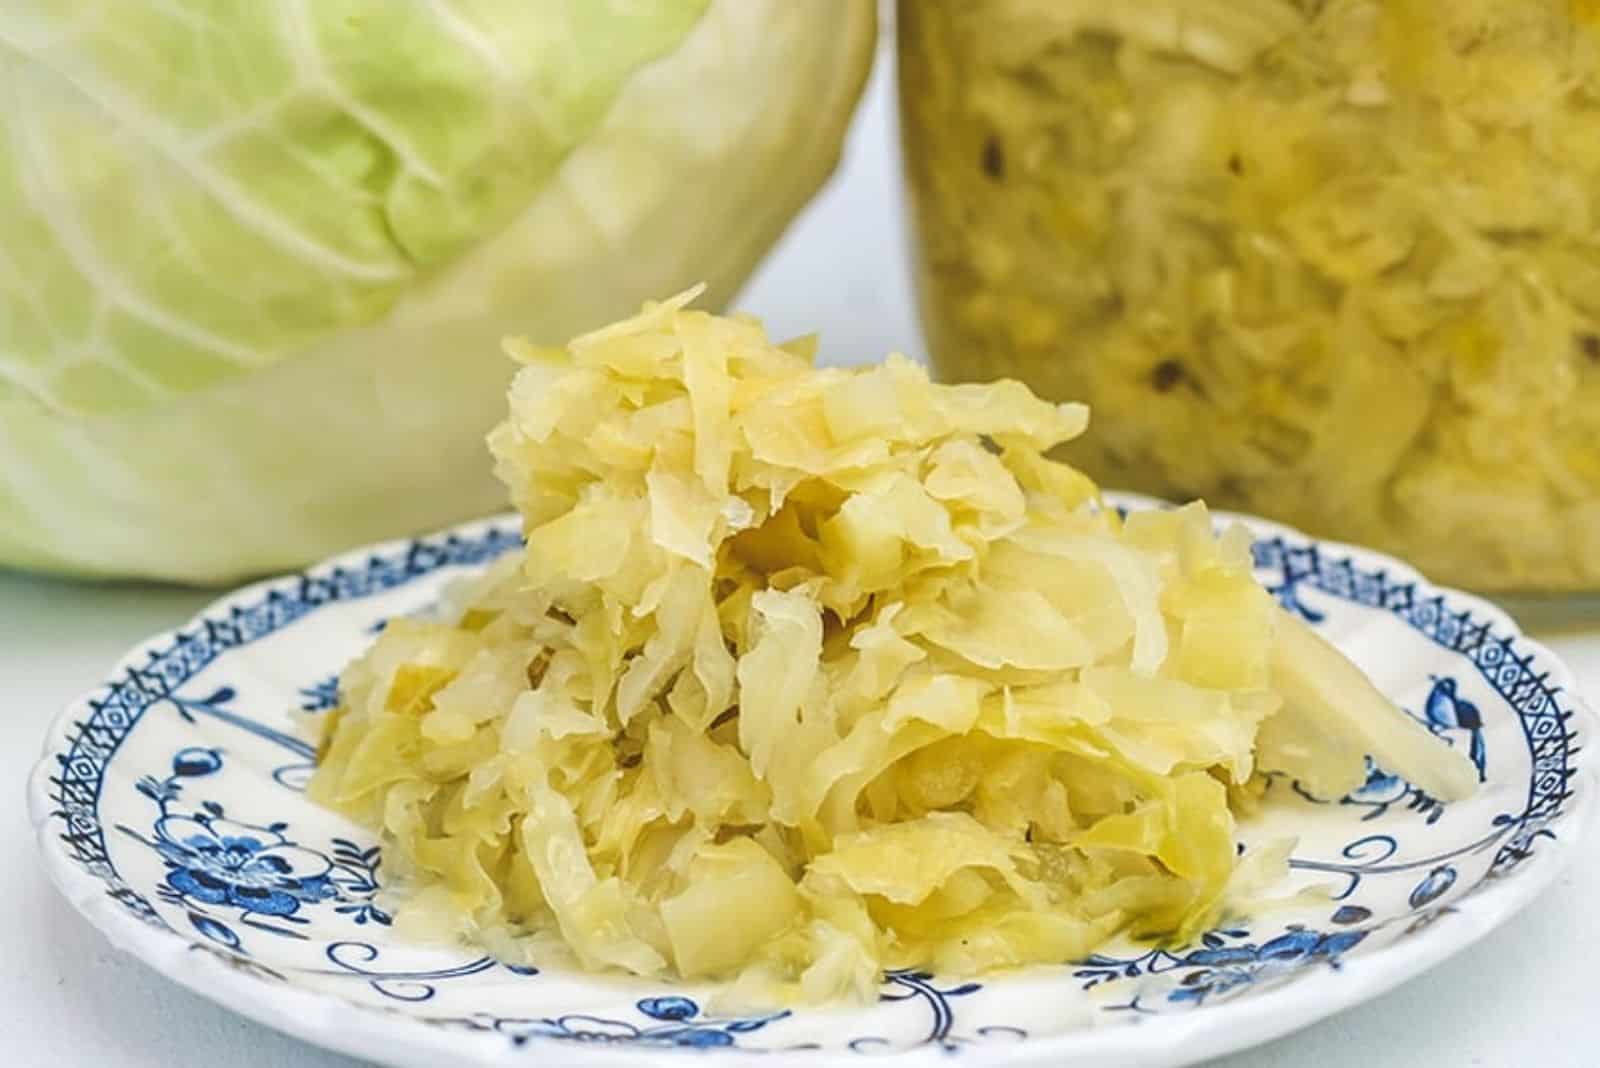 grated cabbage on a plate